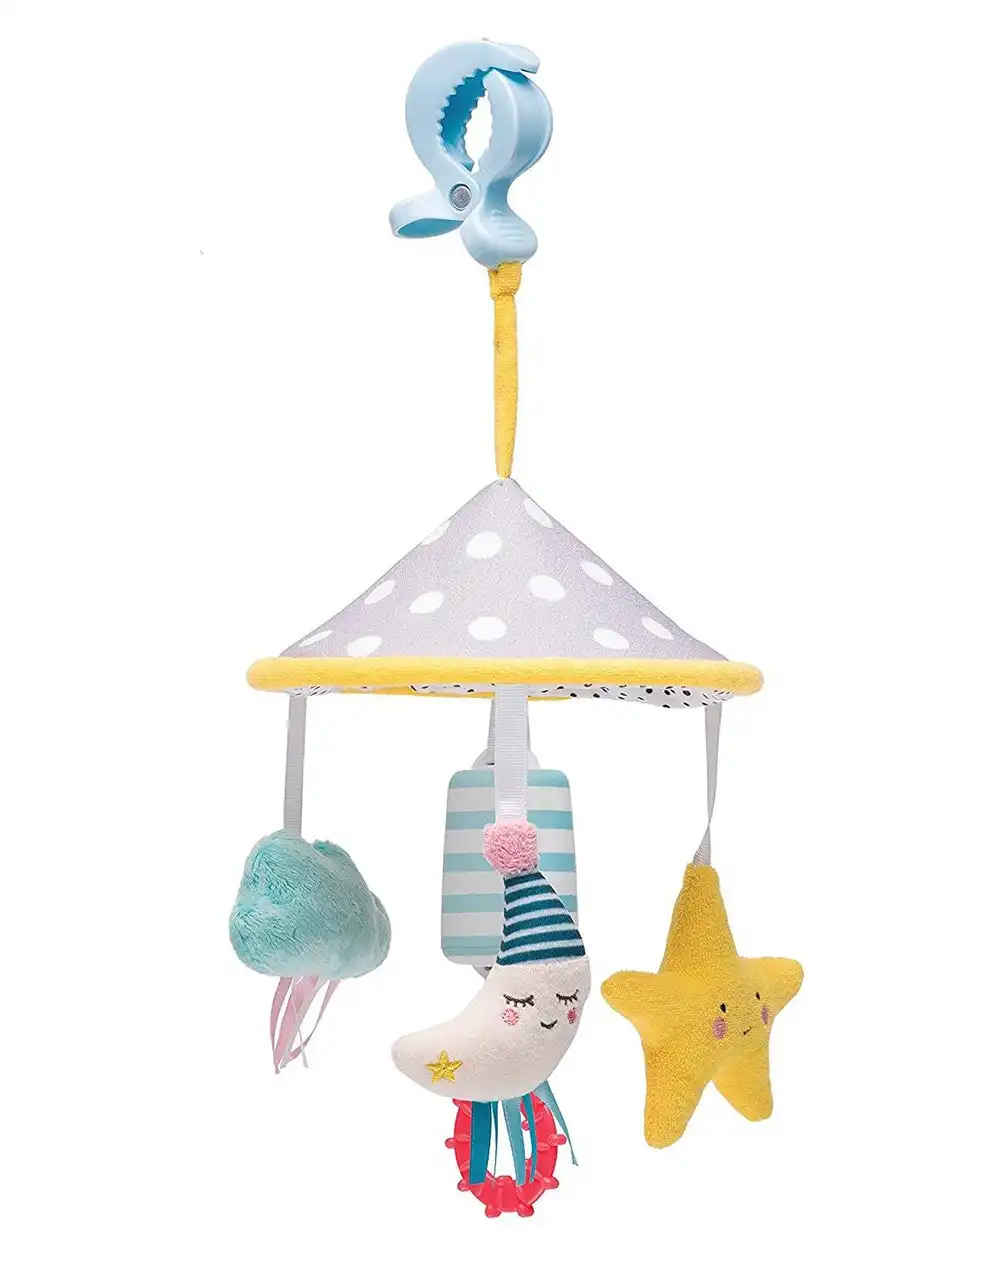 Taf Toys Mini Moon Pram Mobile/Soothing Chime Bells Toy w/ Teether Baby 0m+